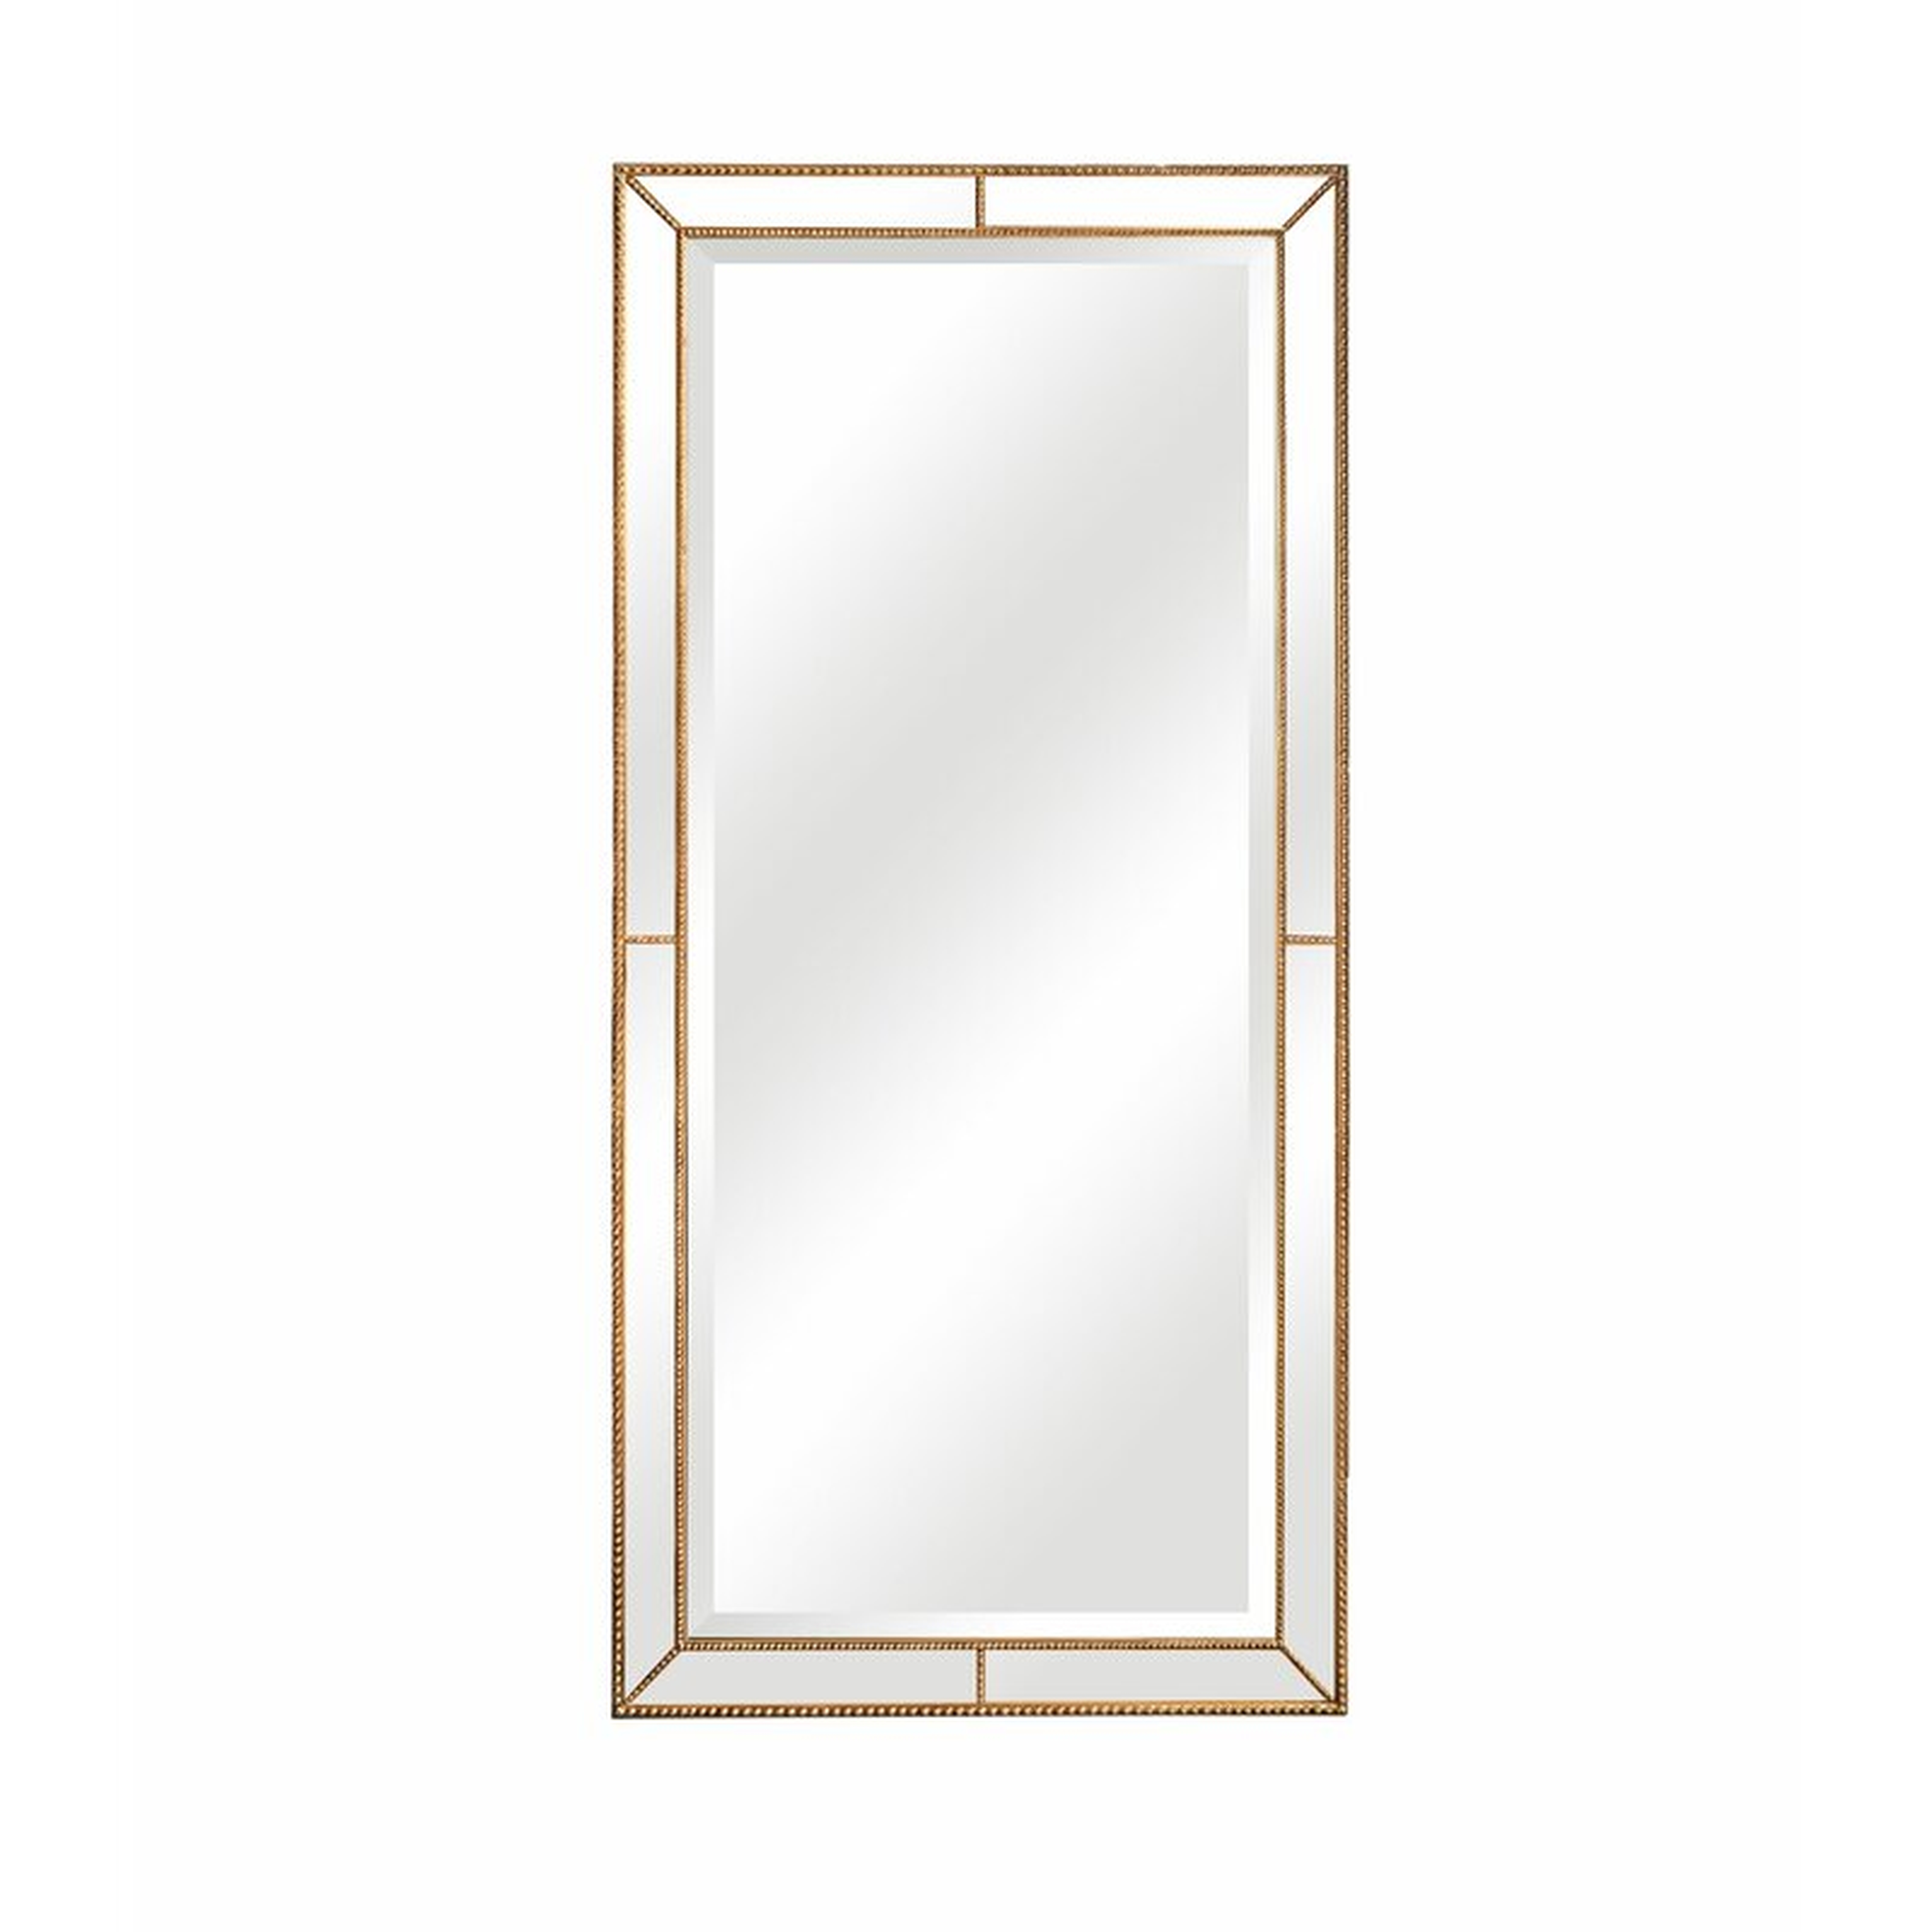 Roxburghe Beveled Full Length Mirror Finish: Antique Gold, Size: 86" H x 40"W x 1.4"D - Perigold